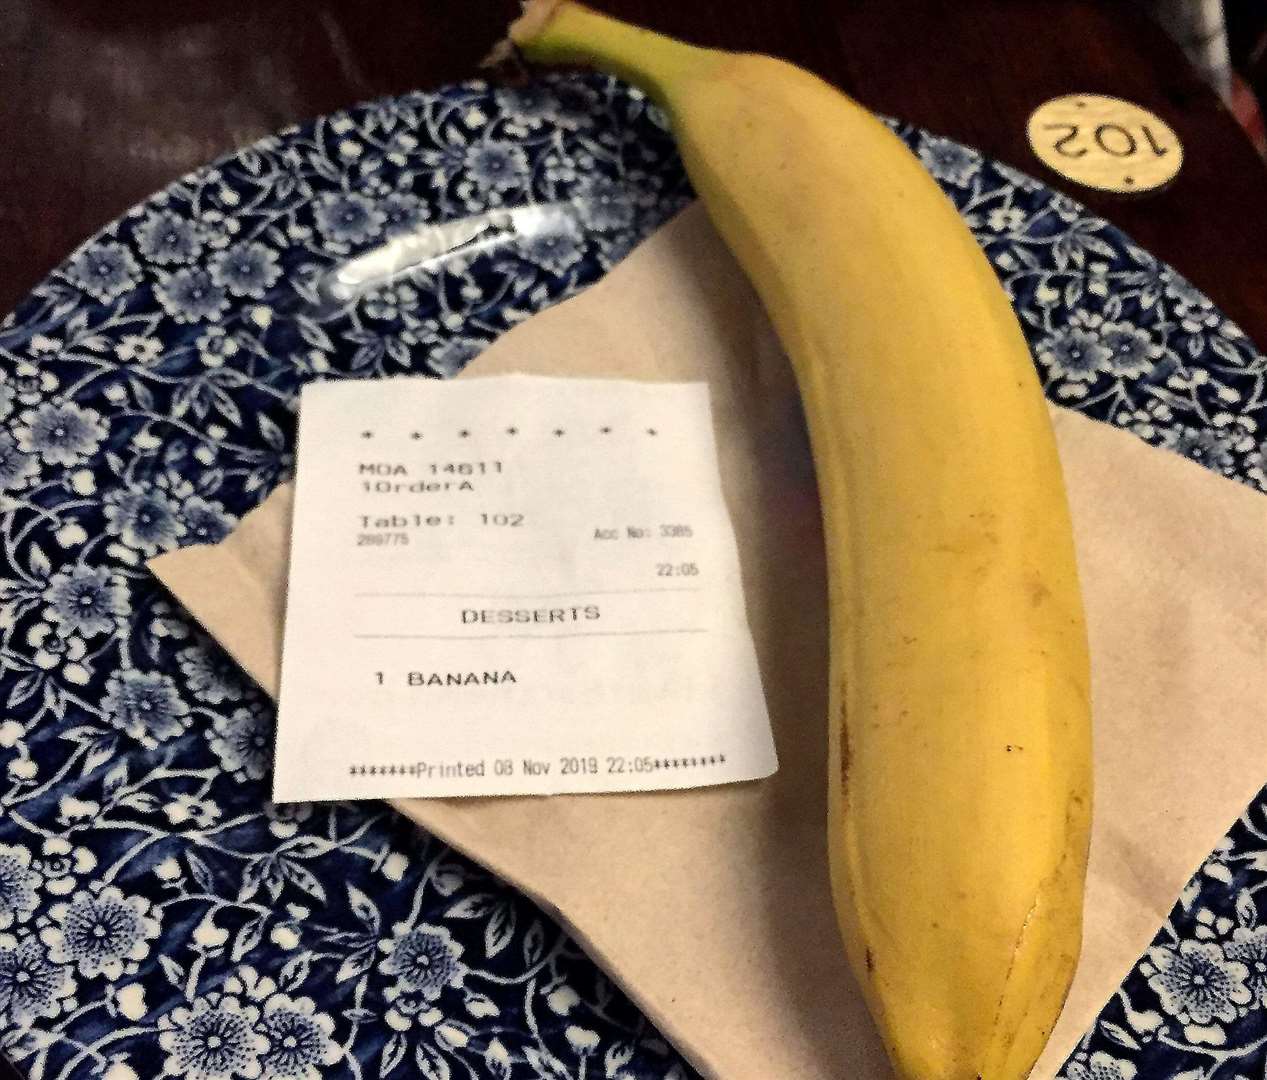 The banana sent to the table of Mark D'arcy-Smith as he was sat in Wetherspoons. Picture: SWNS